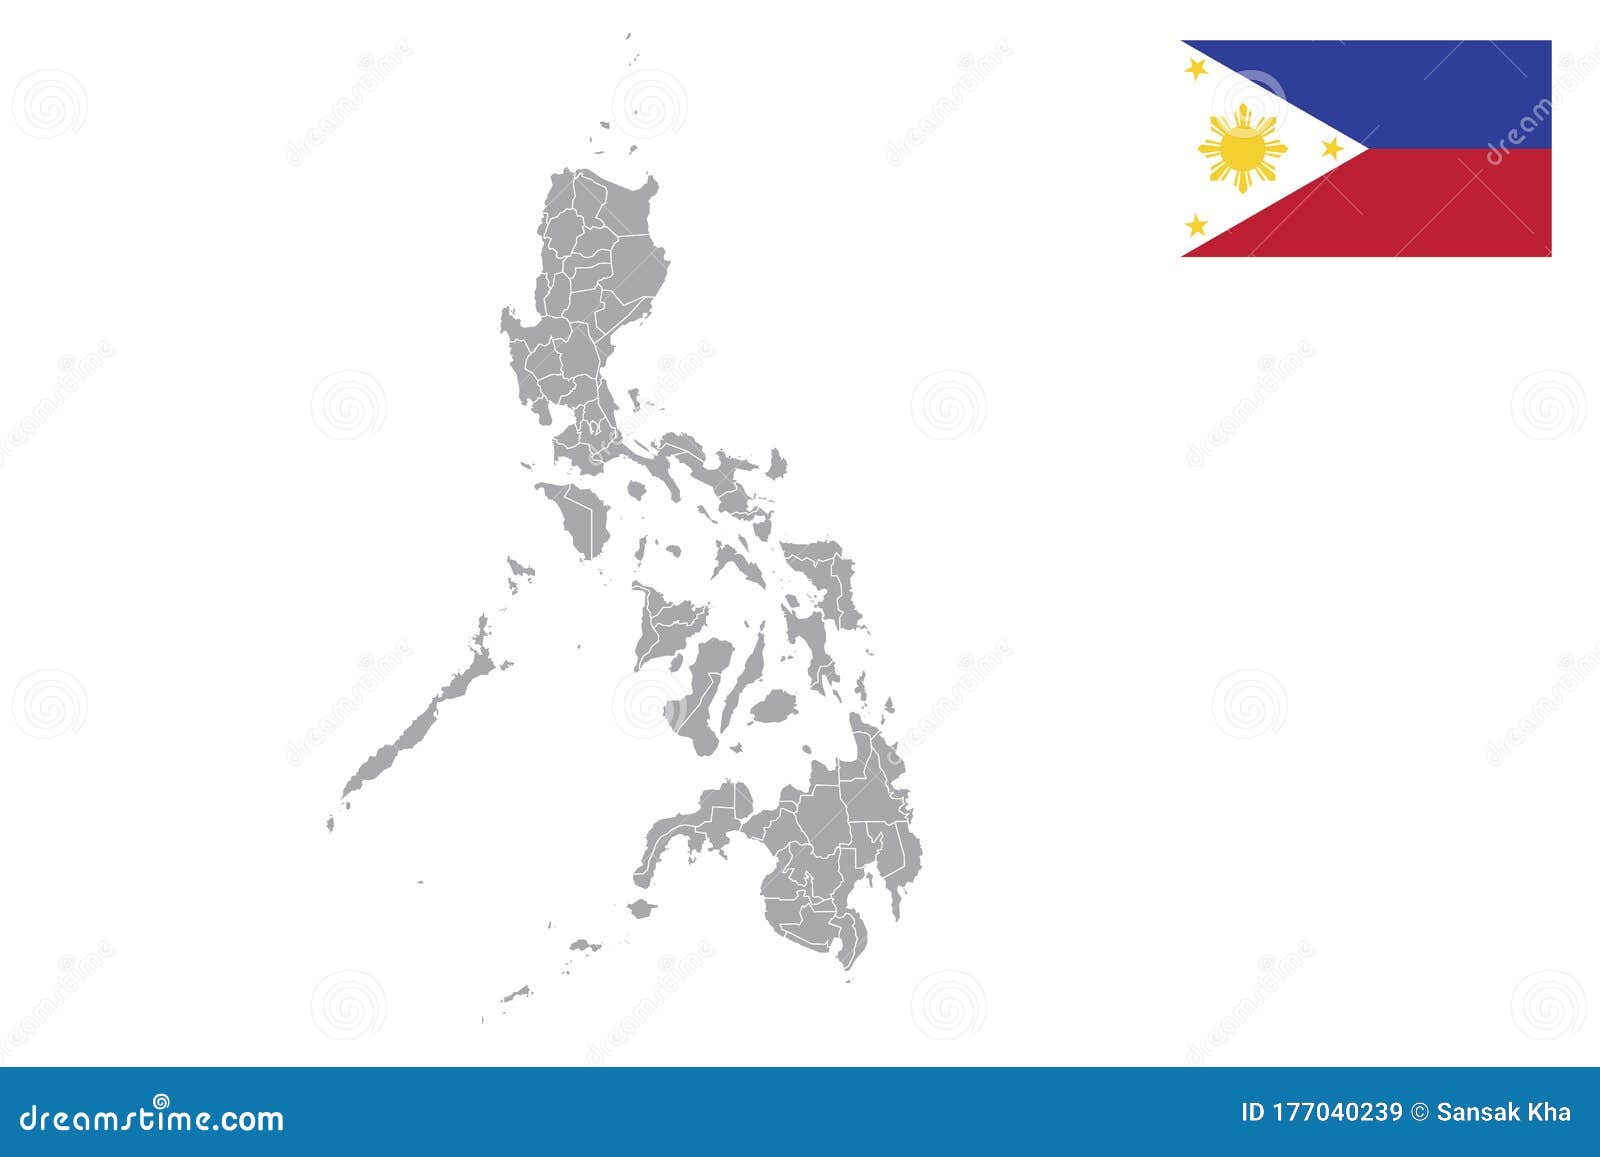 Philippines map with flag. stock vector. Illustration of district ...